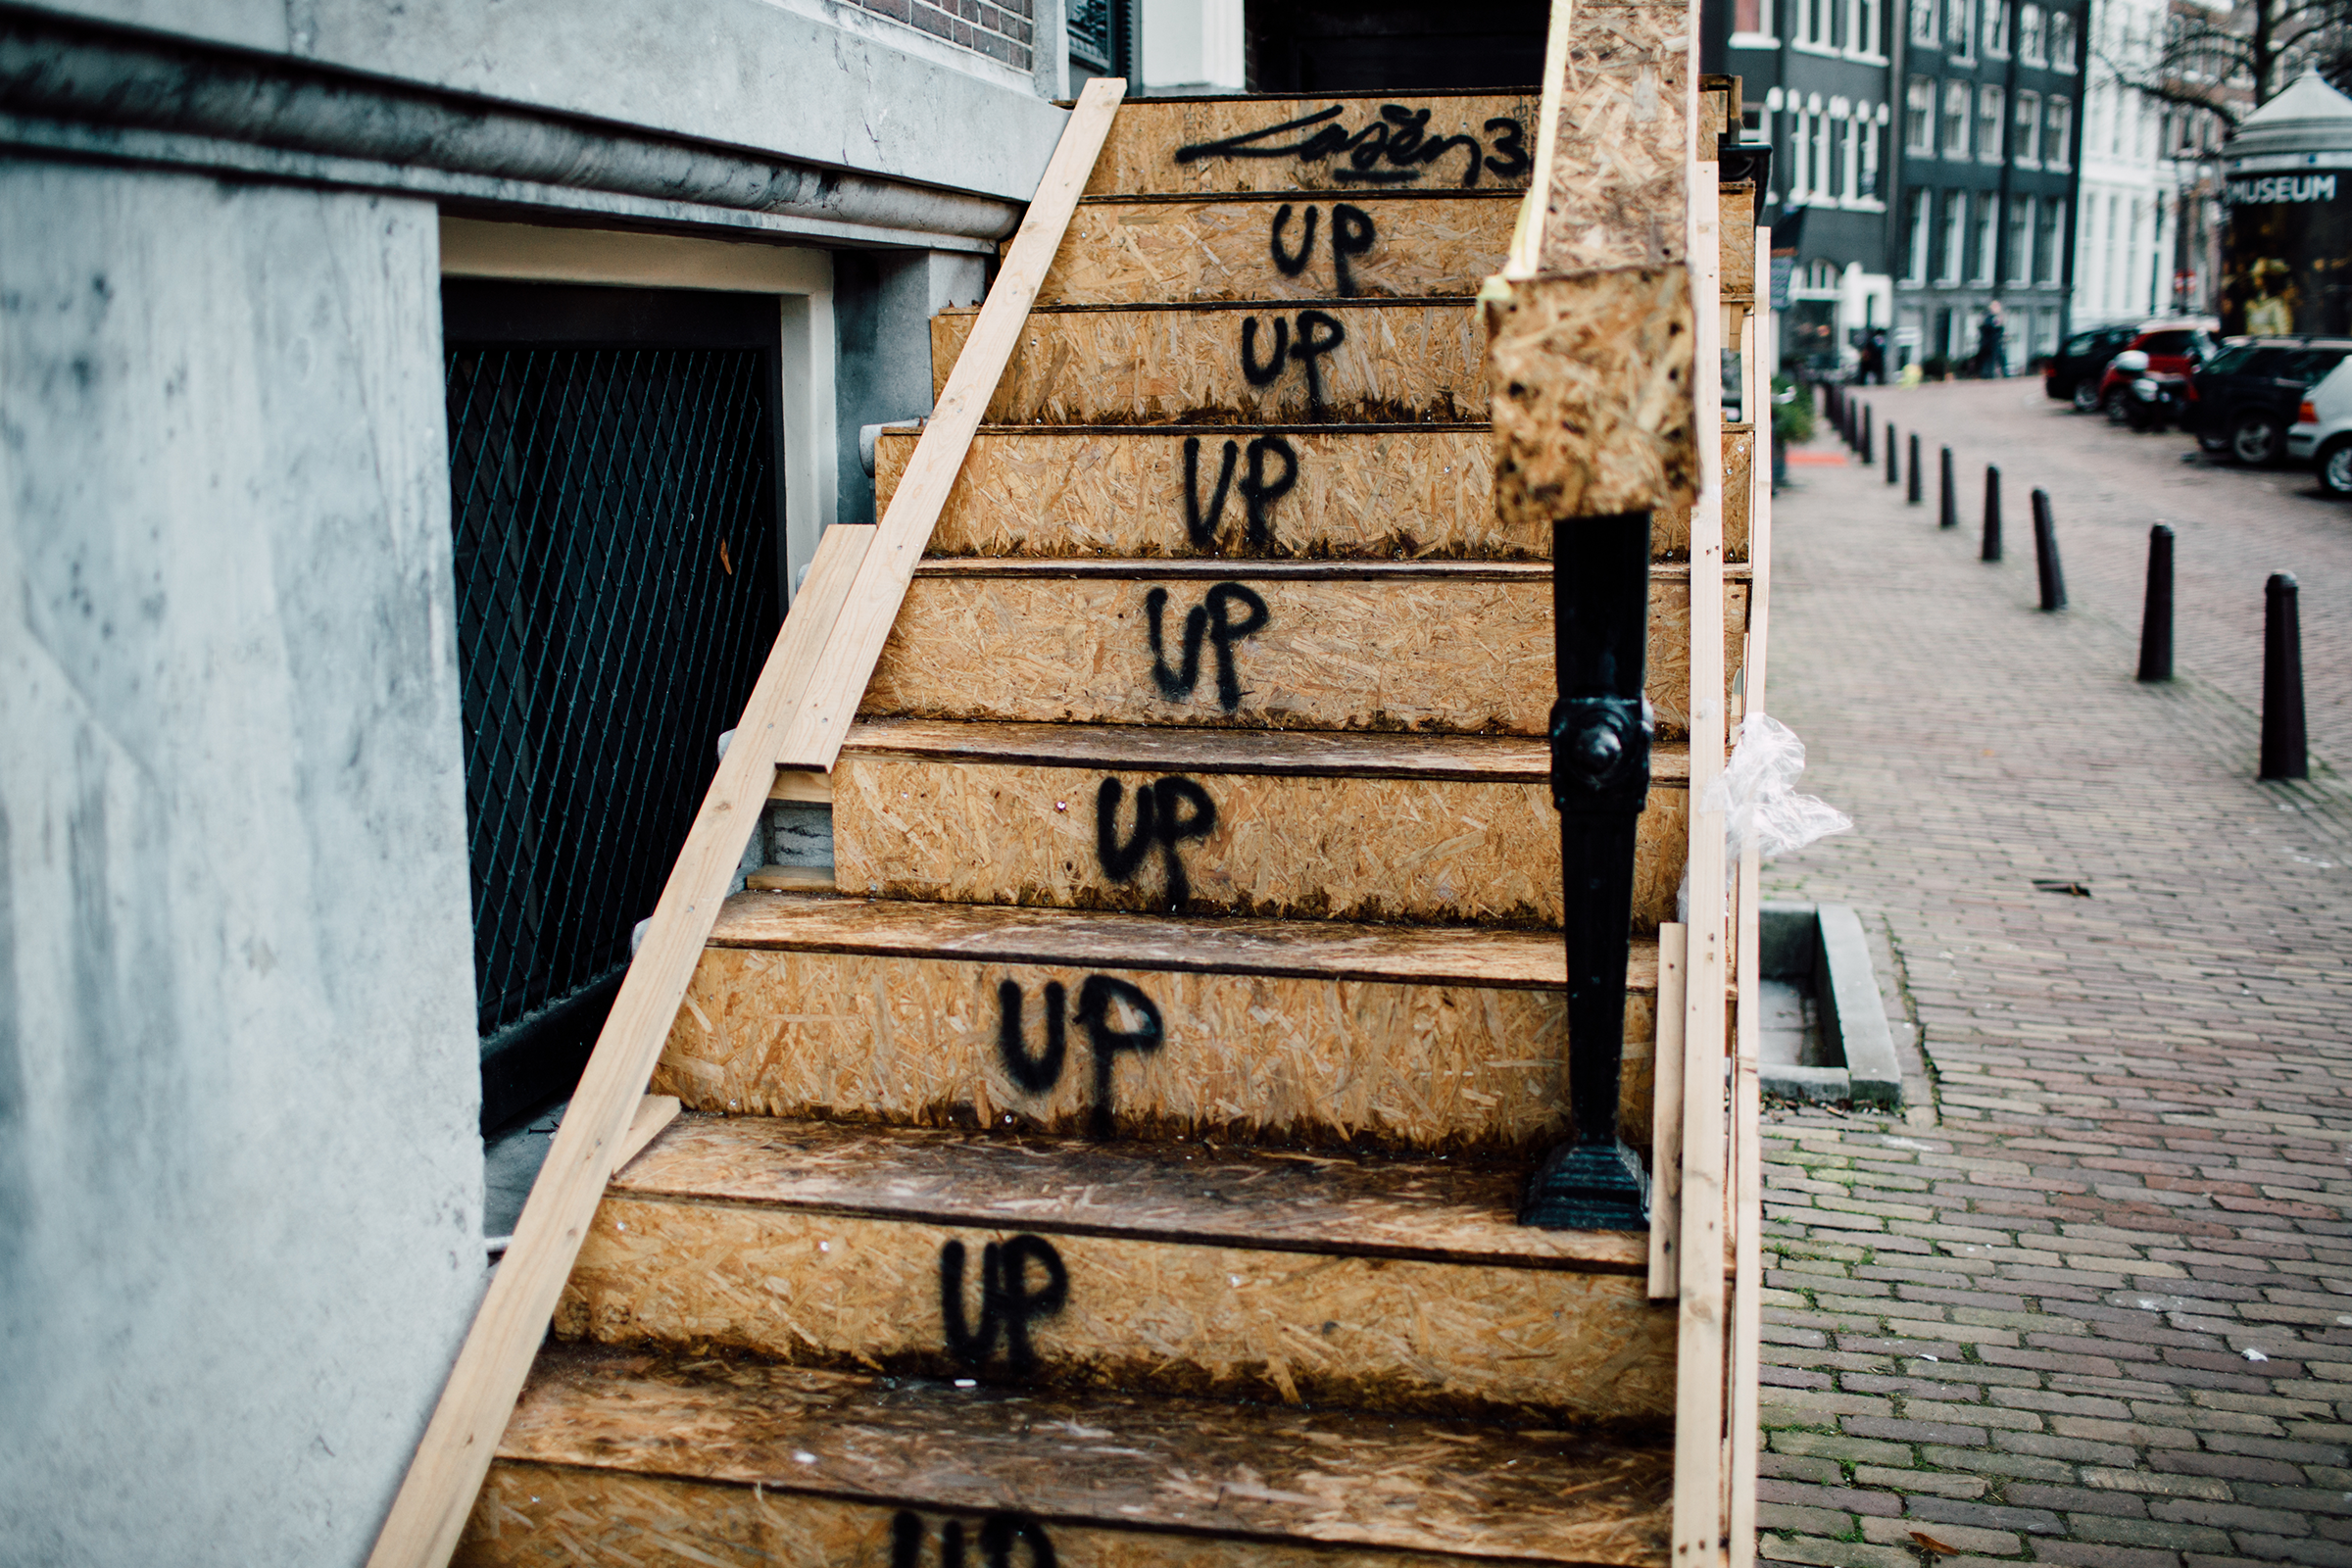 Wooden steps with "Up" spray painted on each